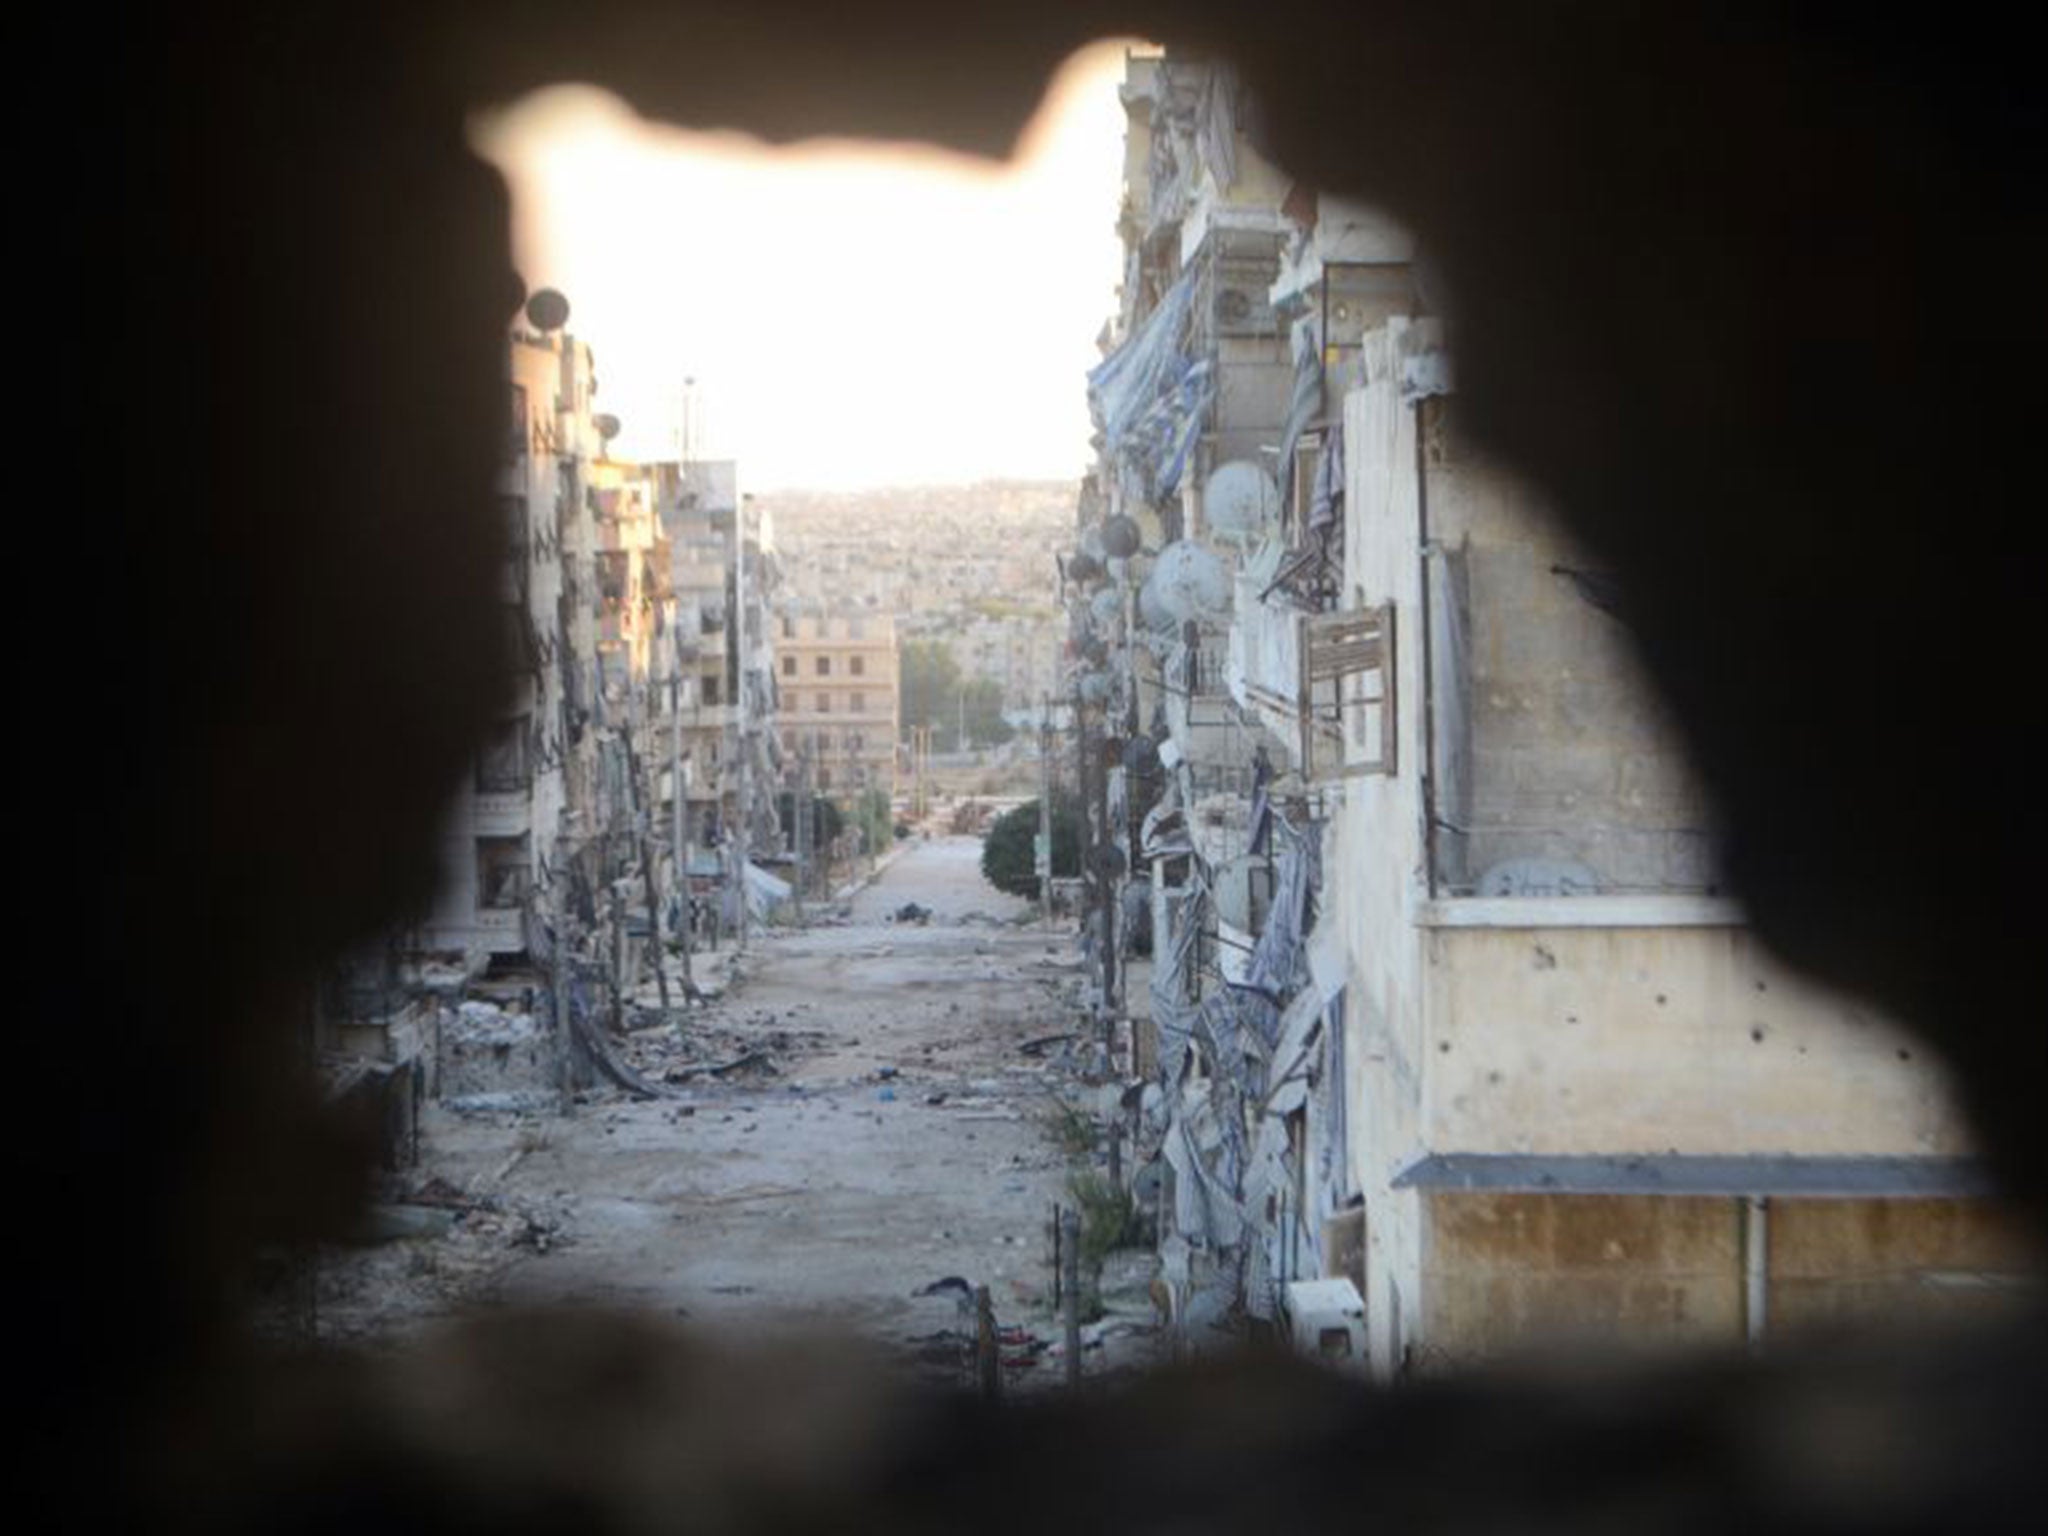 Syria, where war has already devastated cities like Aleppo, is a morally ambiguous case